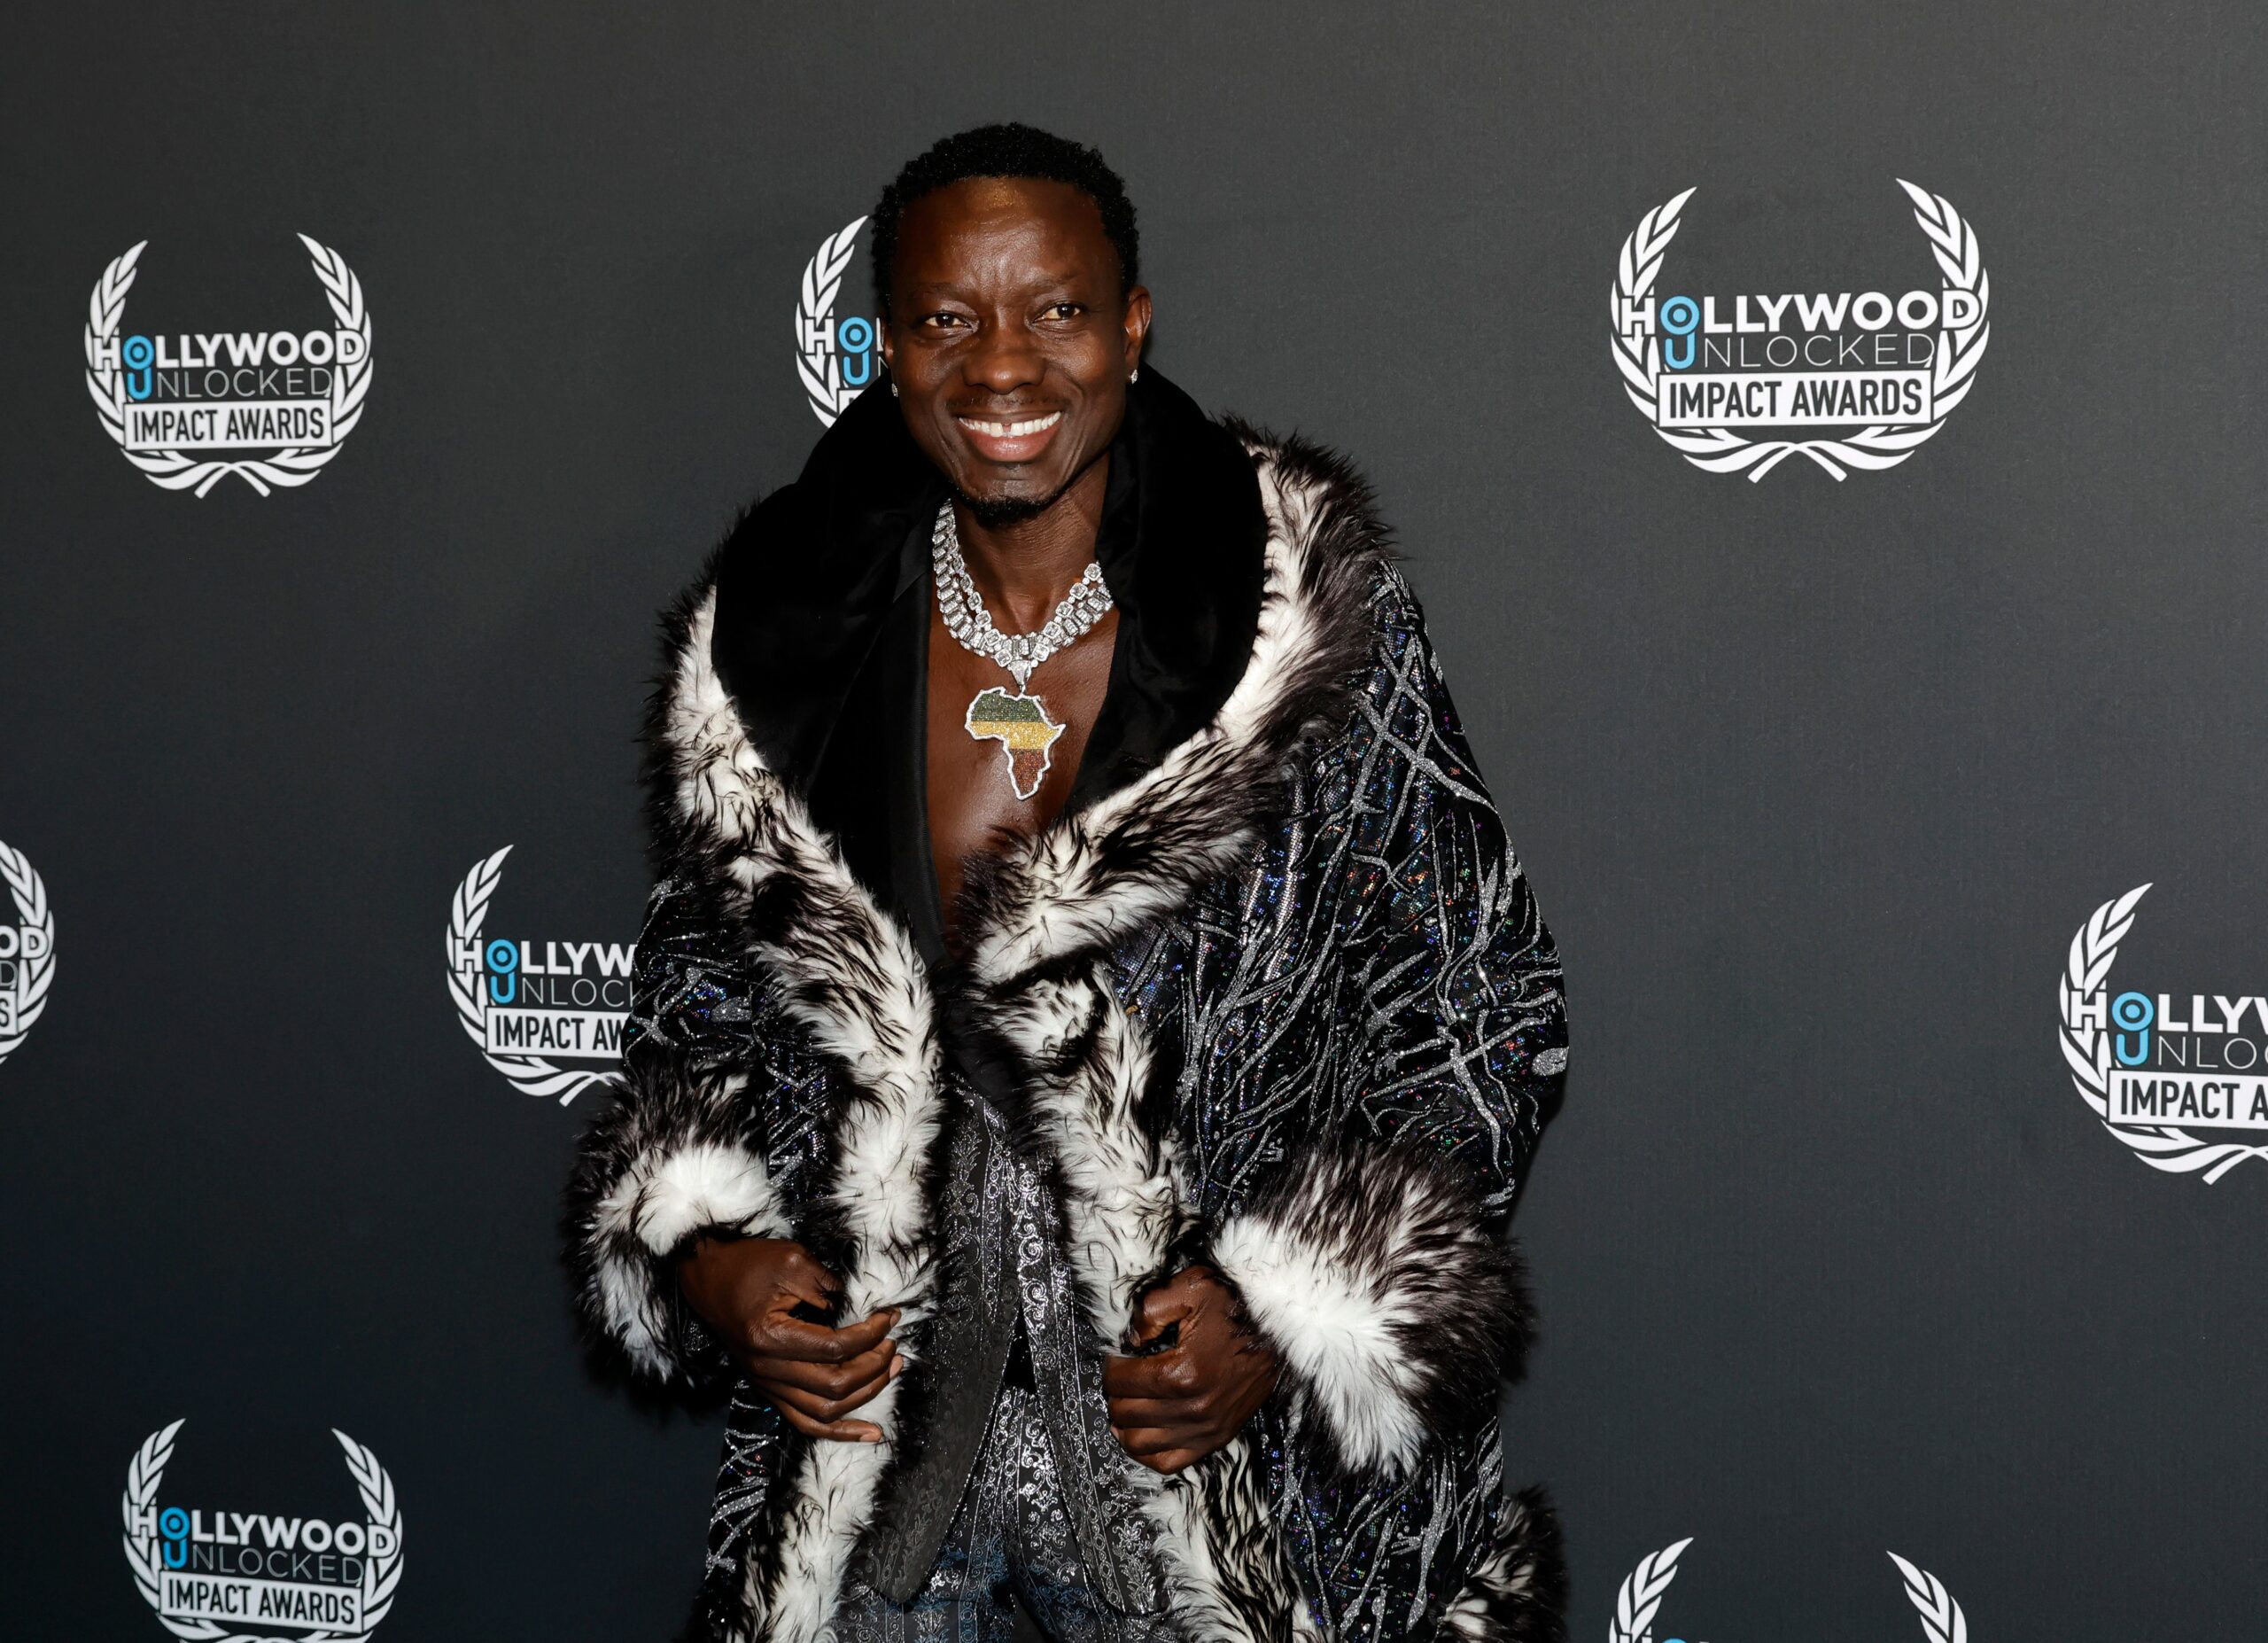 Michael Blackson Says Nick Cannon Will Have “3,000 Grandkids”